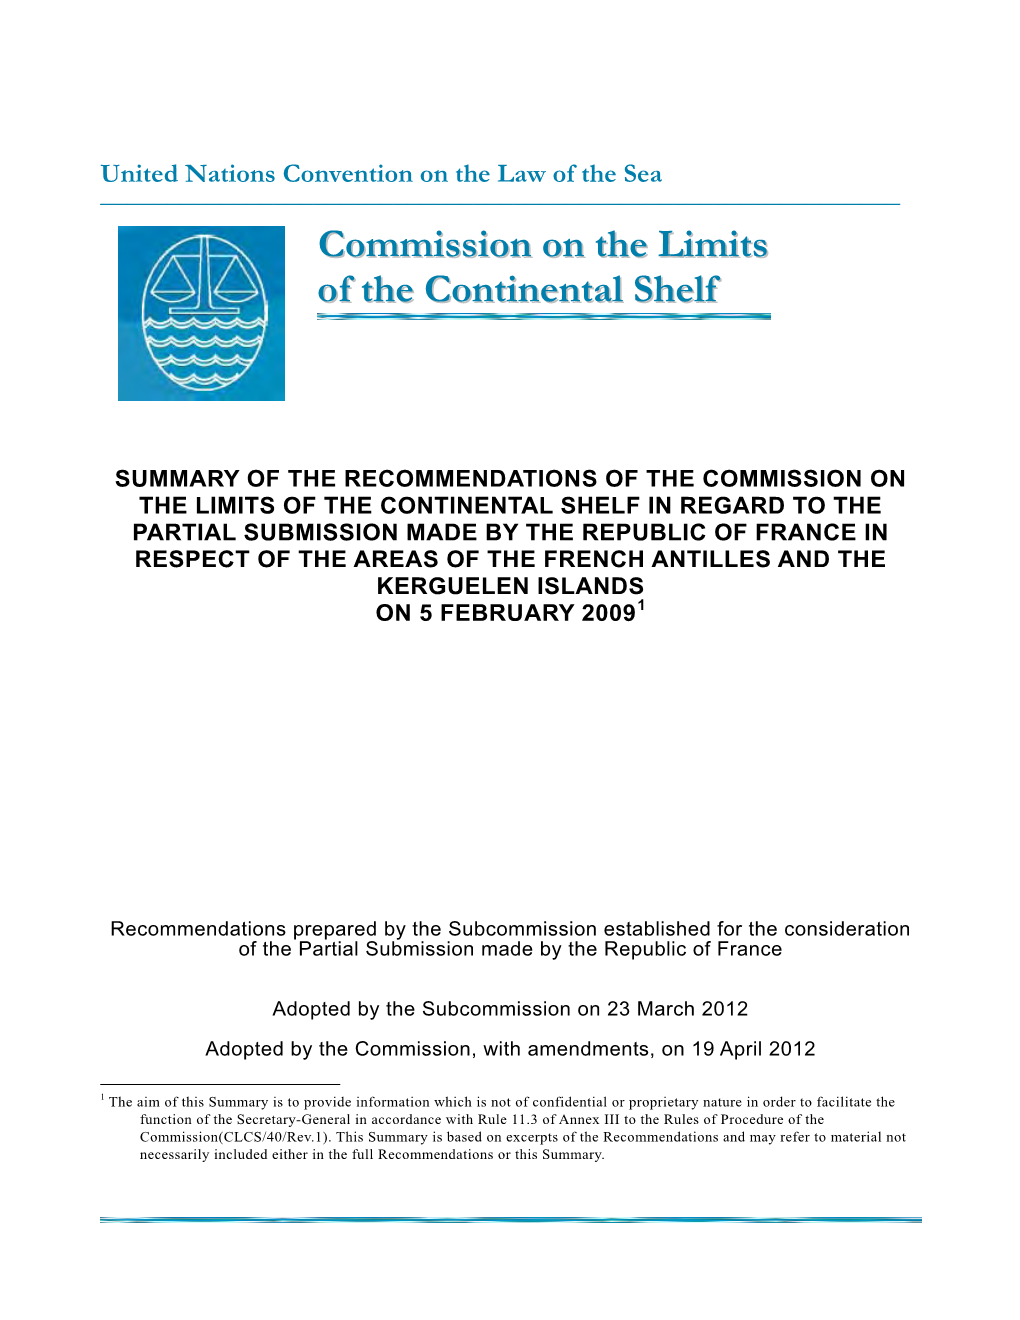 Commission on the Limits of Th Ee Continenta Ll Shelf